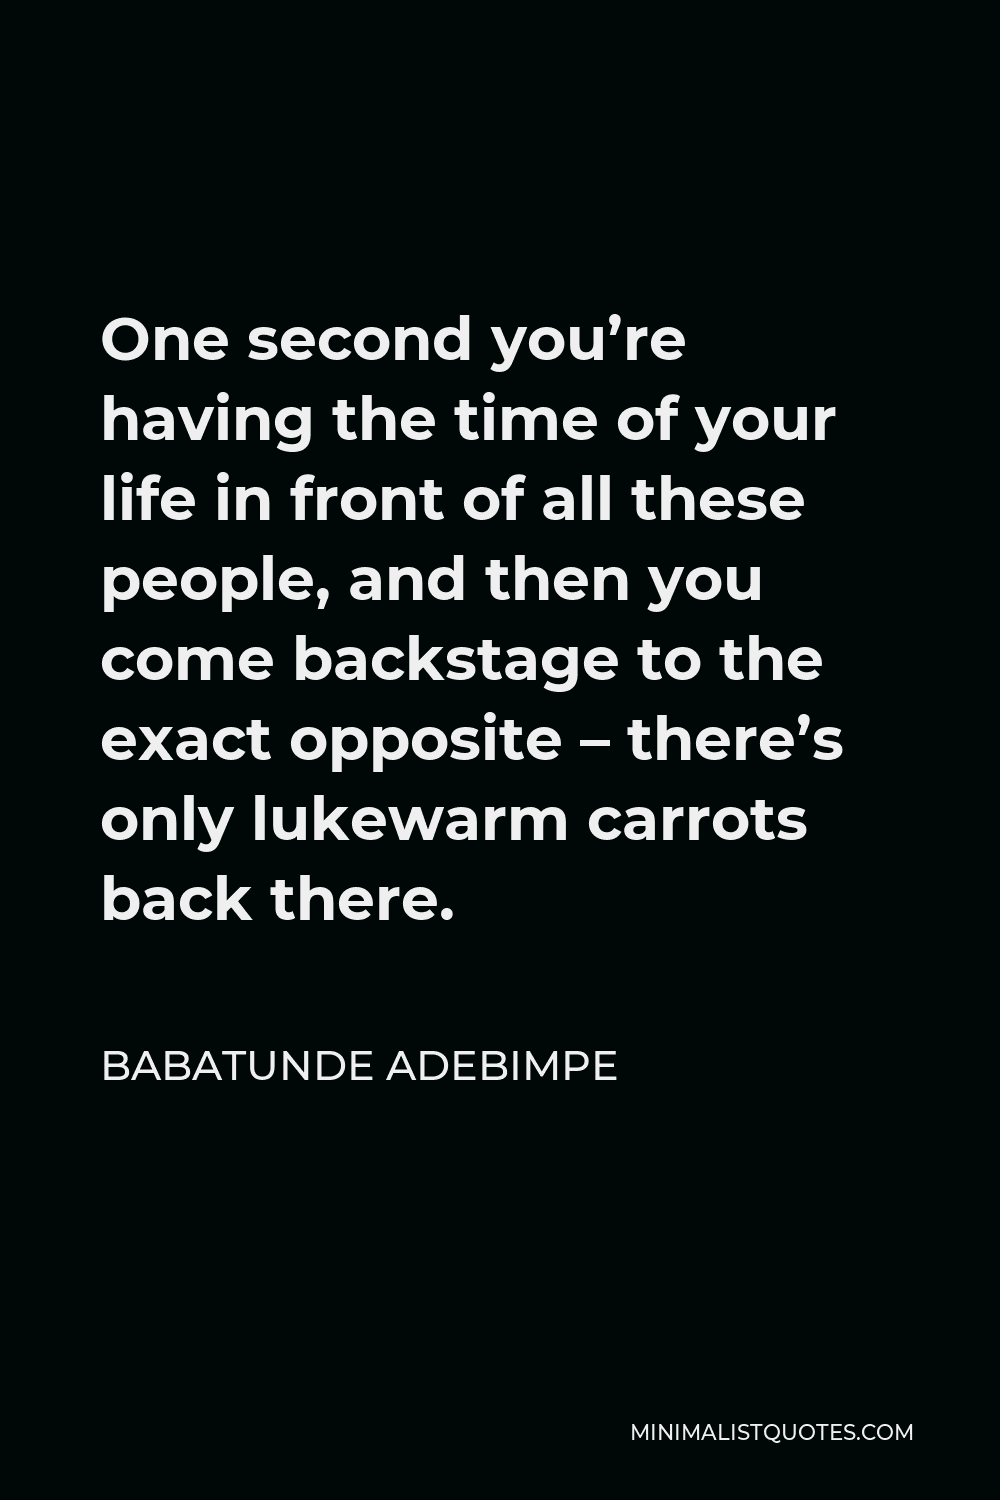 Babatunde Adebimpe Quote - One second you’re having the time of your life in front of all these people, and then you come backstage to the exact opposite – there’s only lukewarm carrots back there.